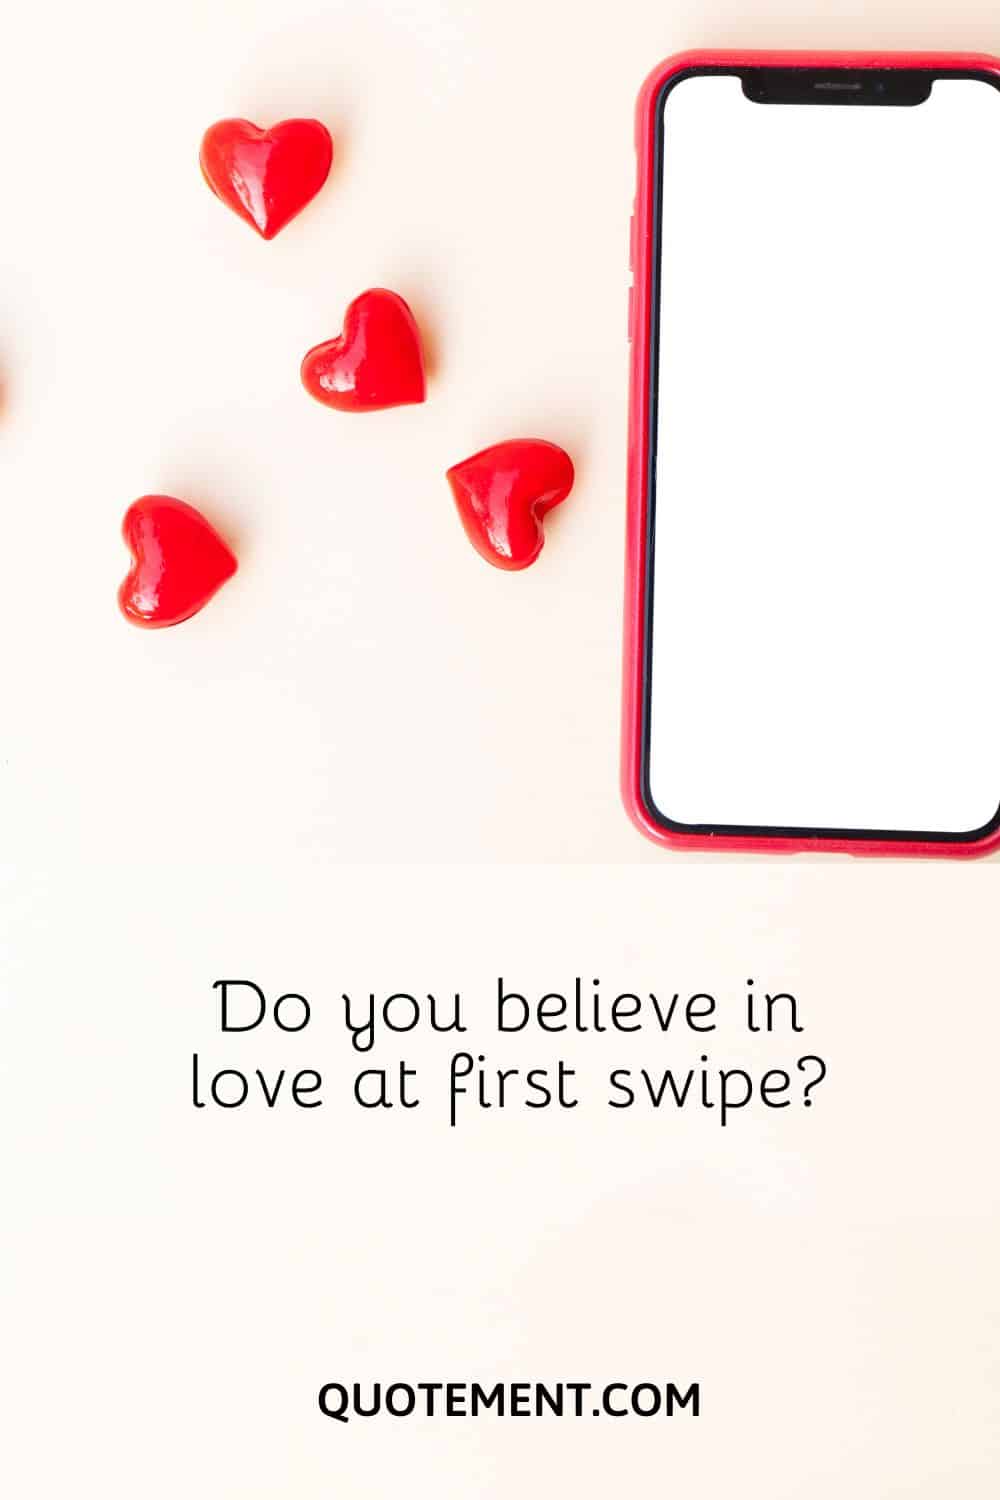 Do you believe in love at first swipe